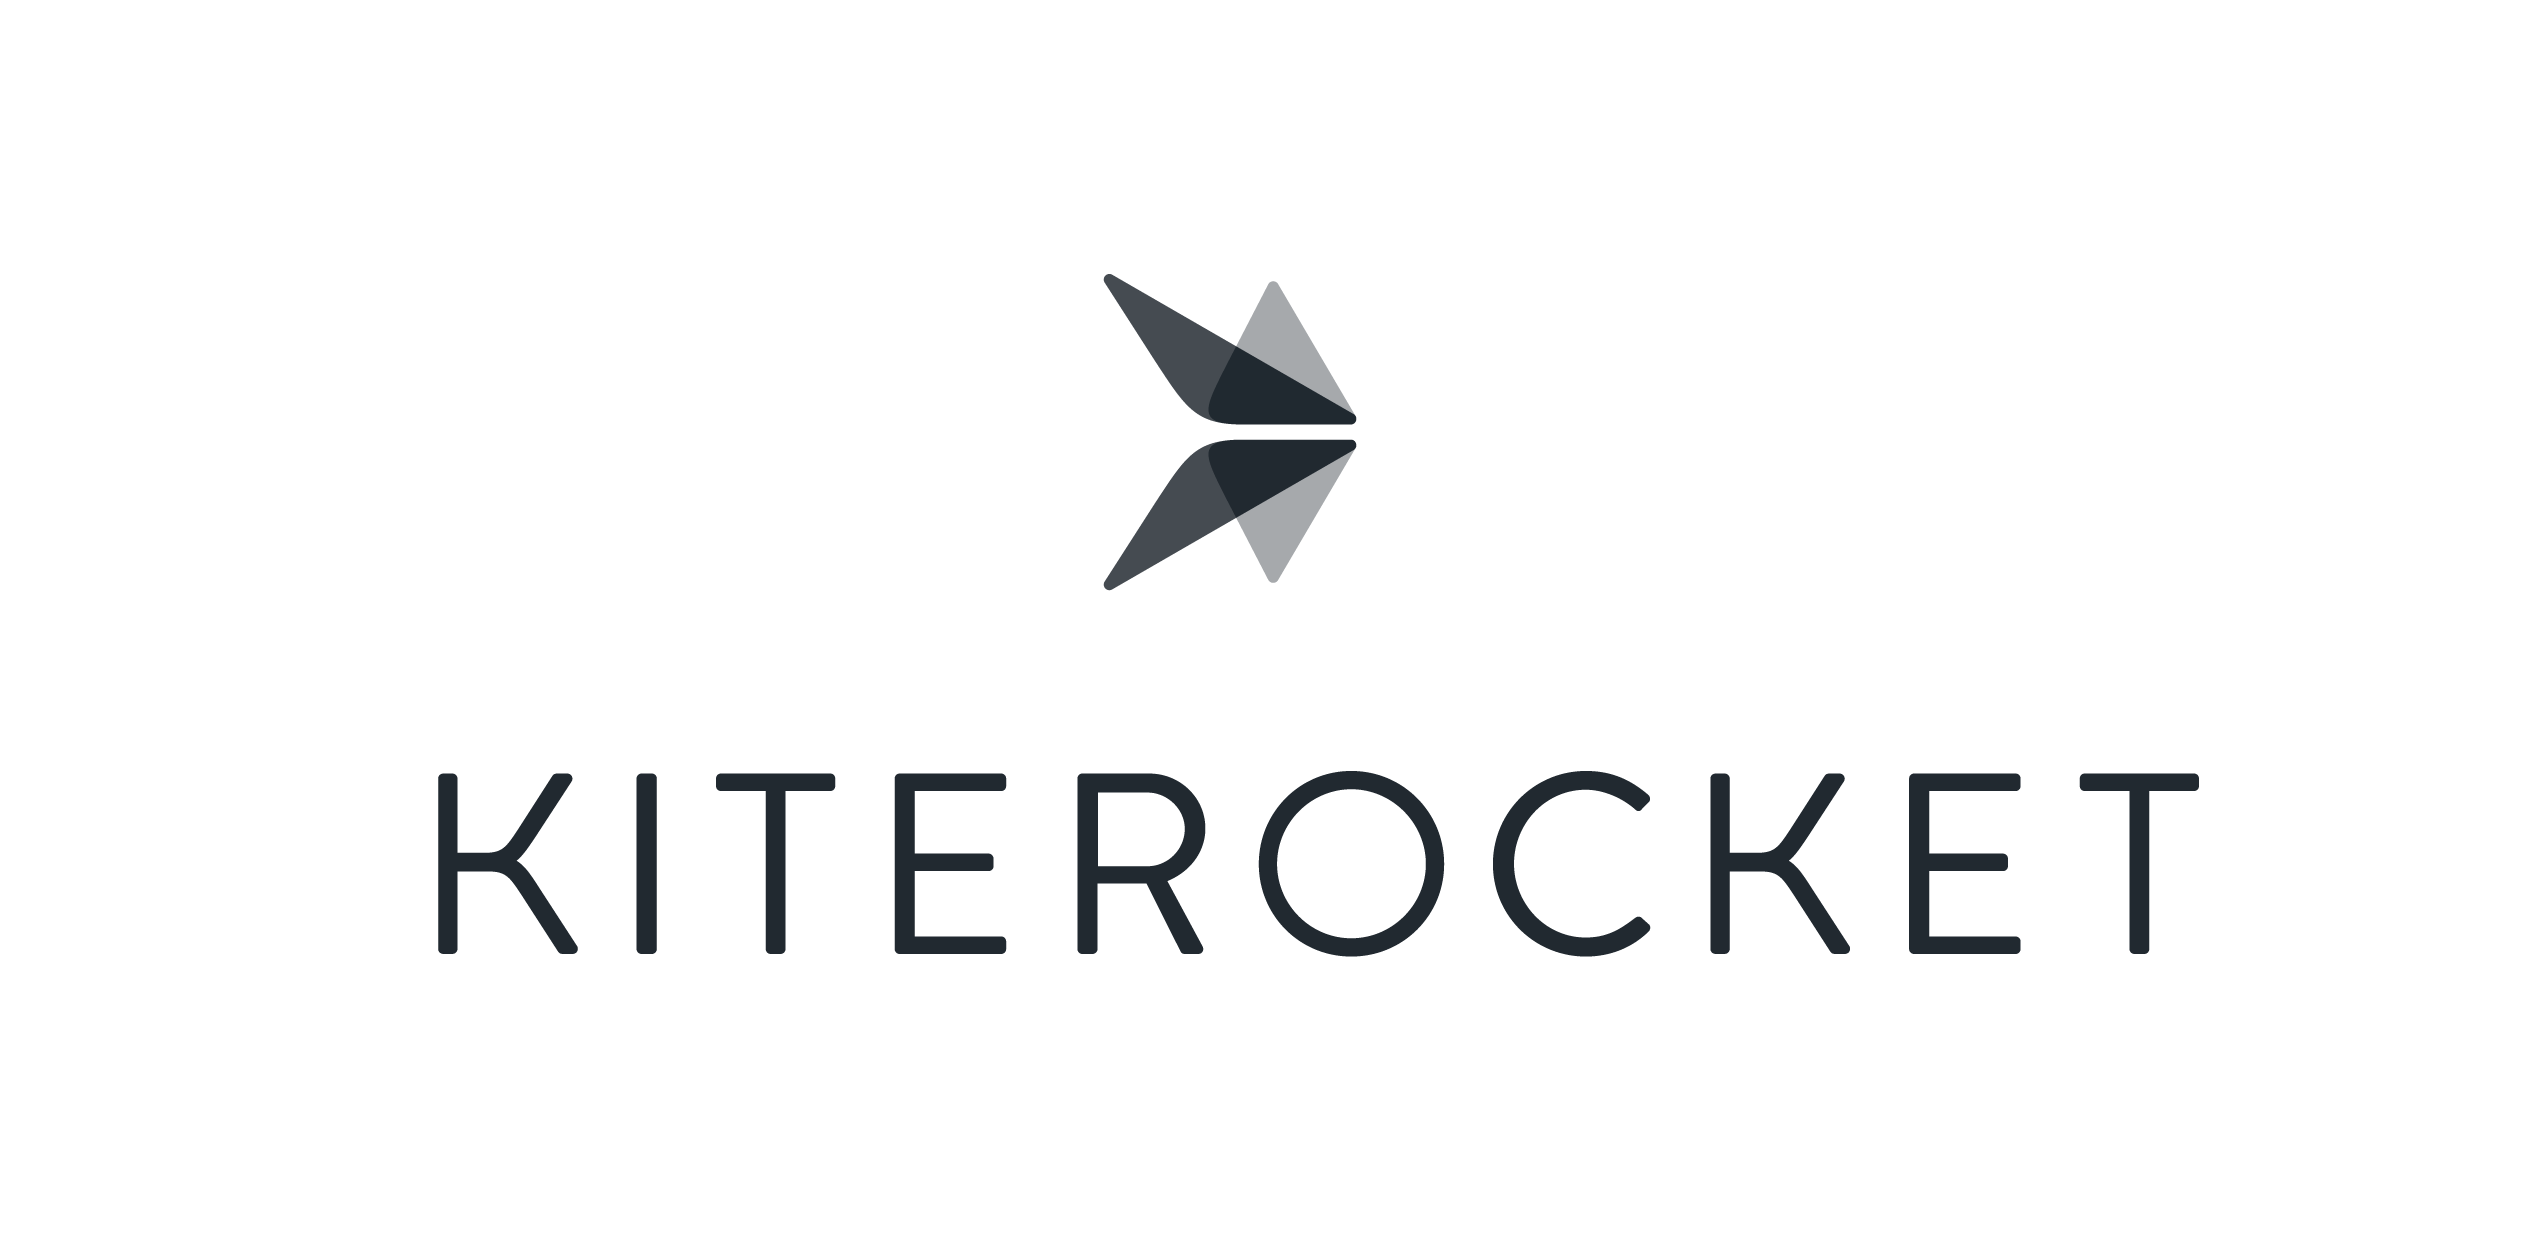 NEC X and Kiterocket Seek Visionary MarTech Entrepreneurs for Venture Studio Program Leveraging AI and Other Emerging Technologies to Power Growth